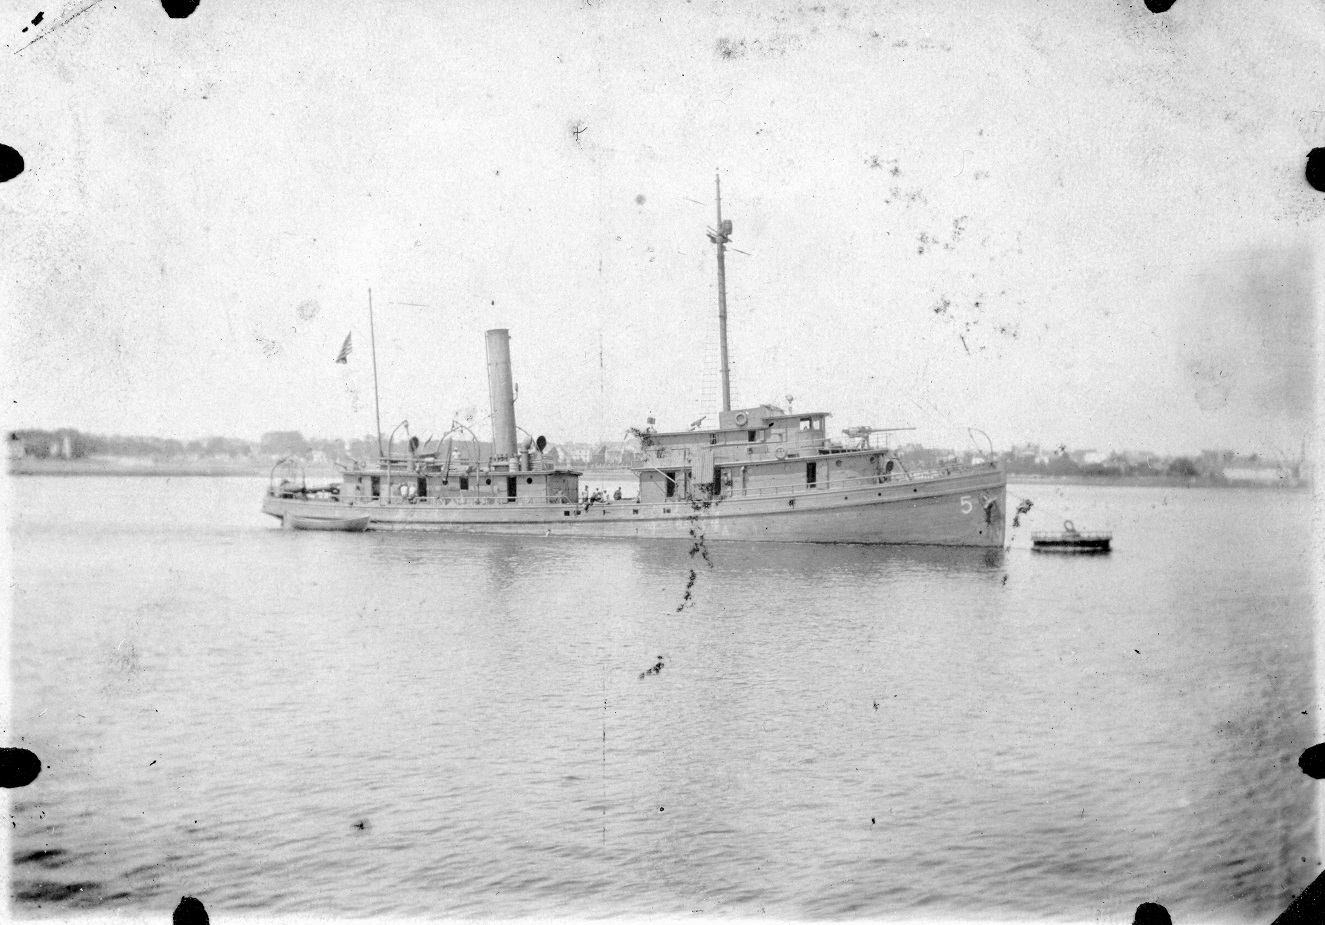 The USS Douglas in calm waters. The minesweepers were former Menhaden fishing vessels designed for Chesapeake Bay weather conditions and not open ocean conditions. (Courtesy of Navsource.org)